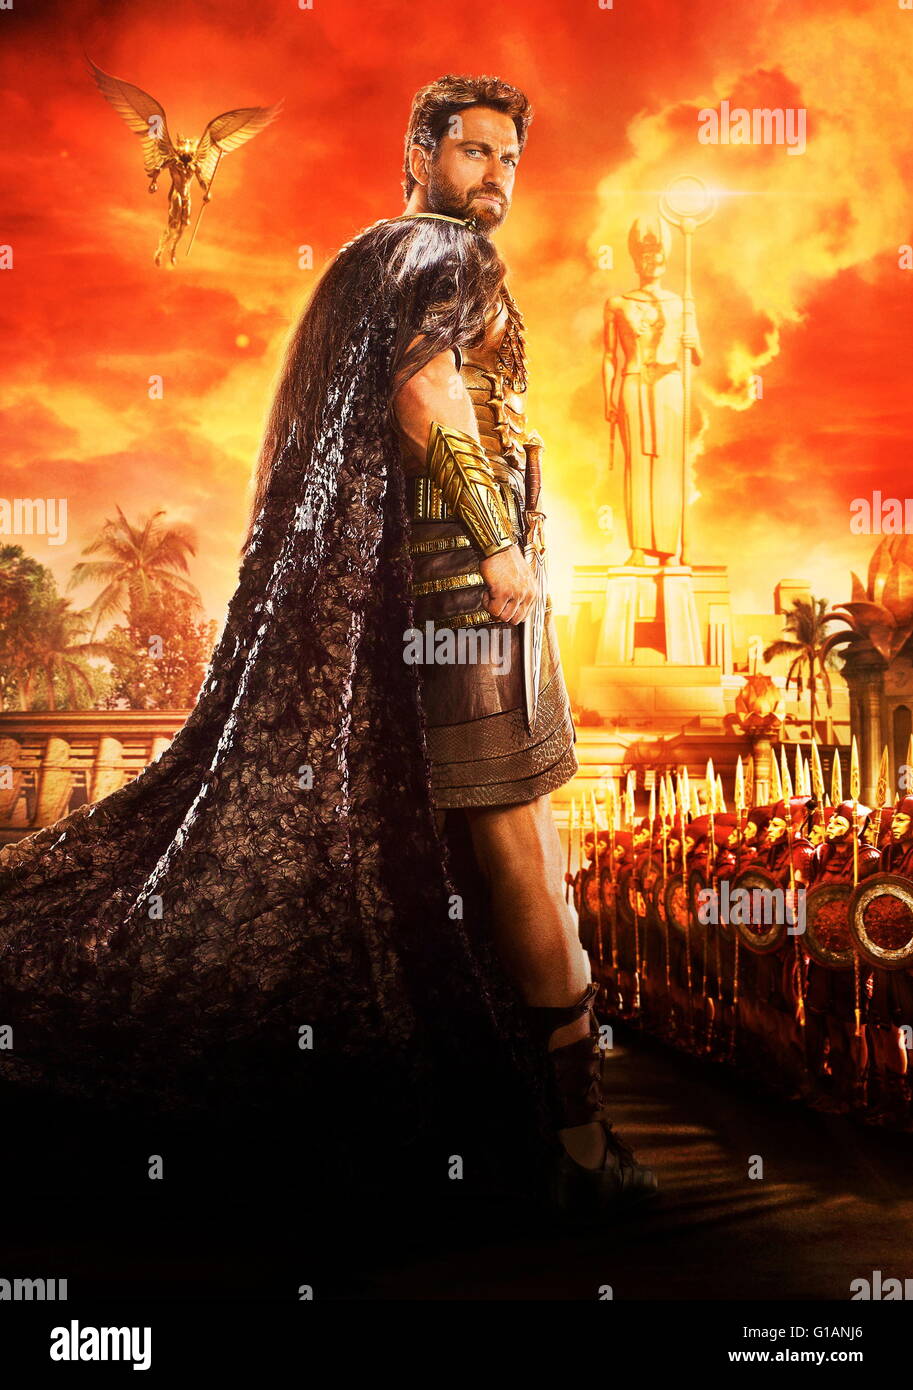 RELEASE DATE: February 26, 2016 TITLE: Gods of Egypt STUDIO: Fox Studios DIRECTOR: Alex Proyas PLOT: Mortal hero Bek teams with the god Horus in an alliance against Set, the merciless god of darkness, who has usurped Egypt's throne, plunging the once peaceful and prosperous empire into chaos and conflict PICTURED: Poster Art (Credit Image: c Fox Studios/Entertainment Pictures/) Stock Photo